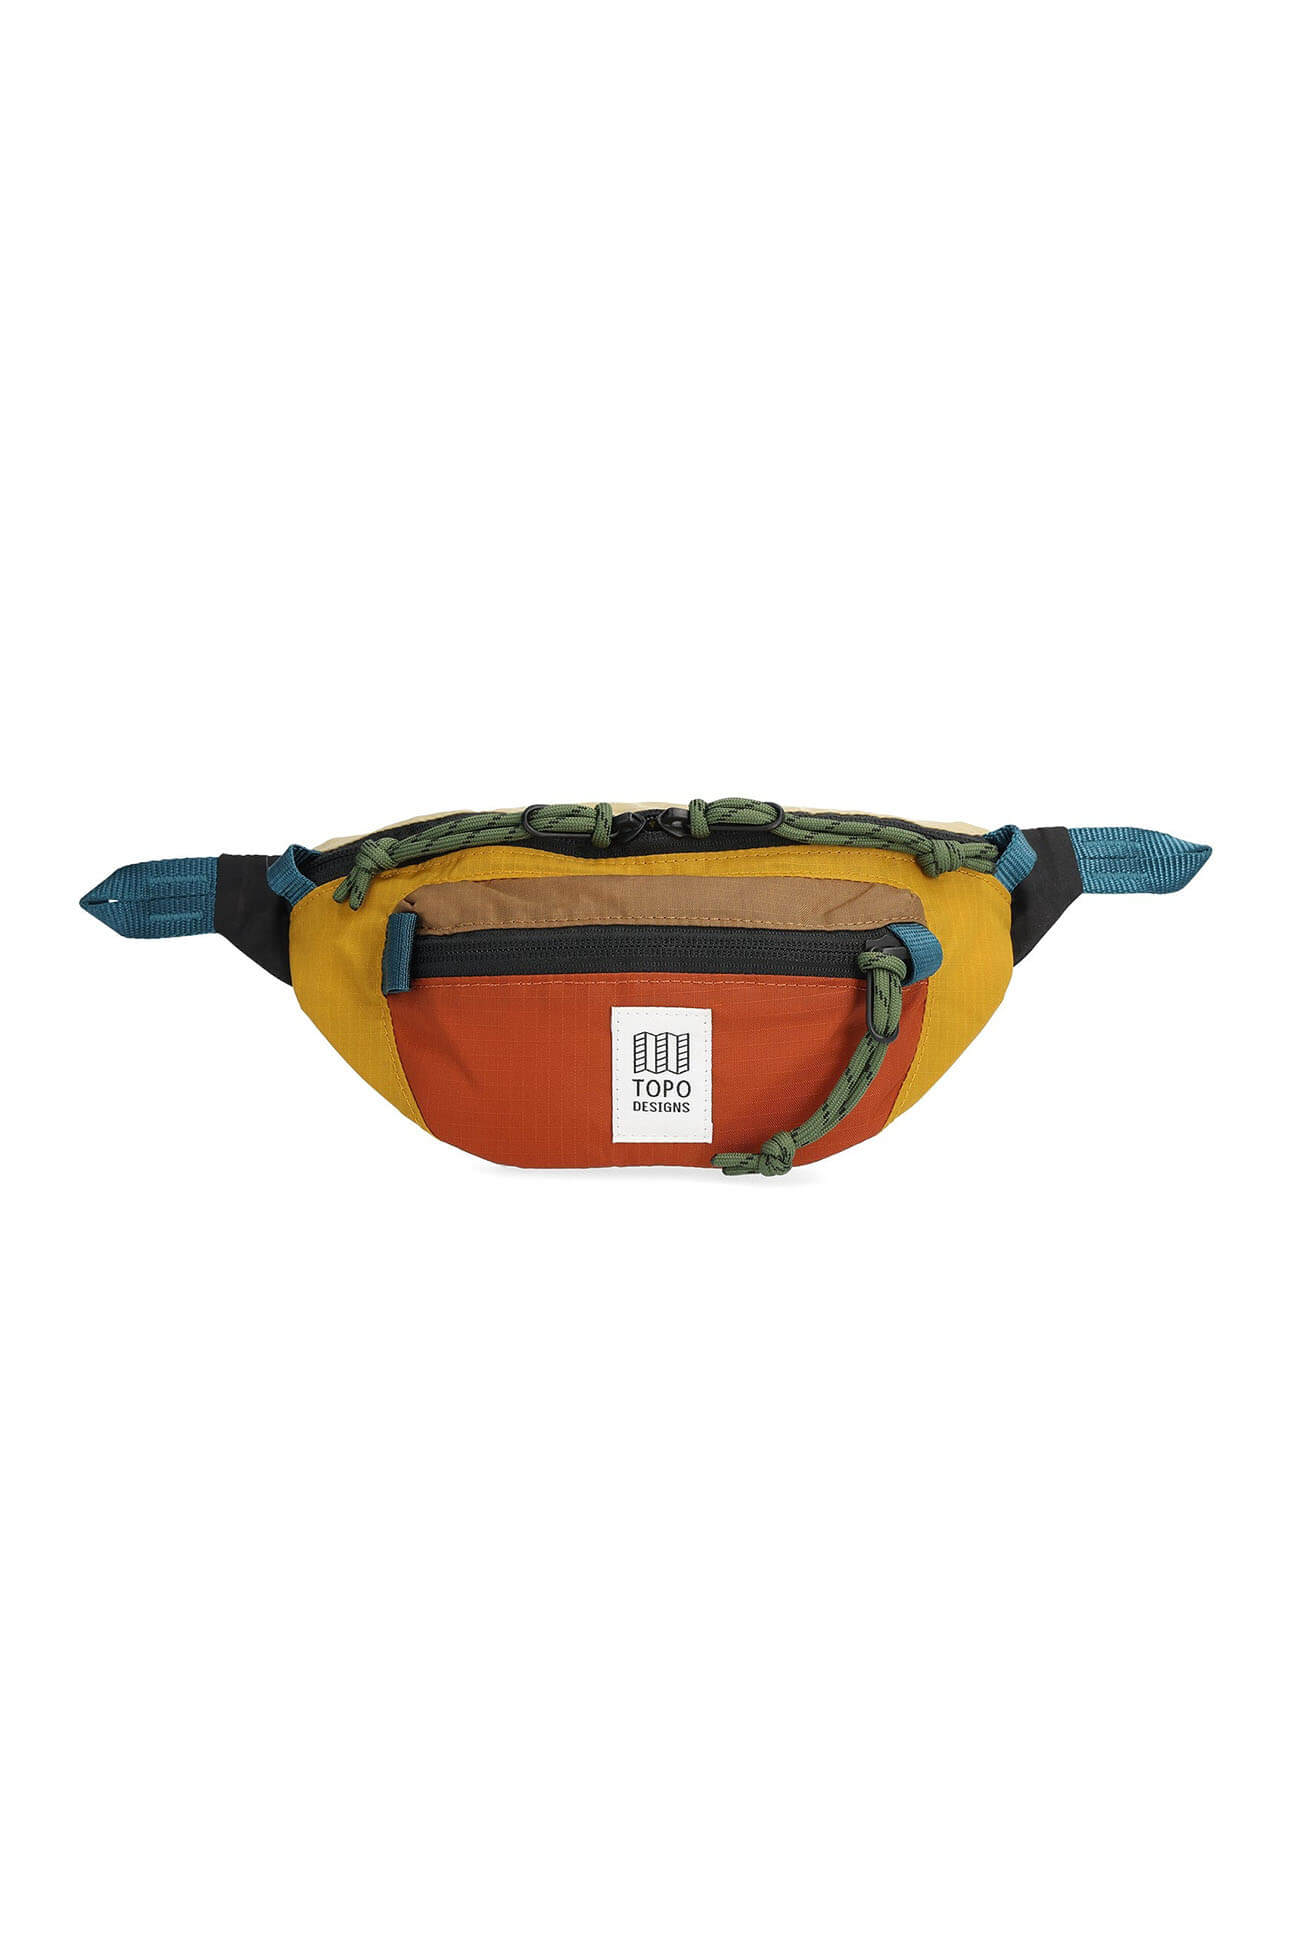 Topo Designs mountain waist pack in mustard and clay